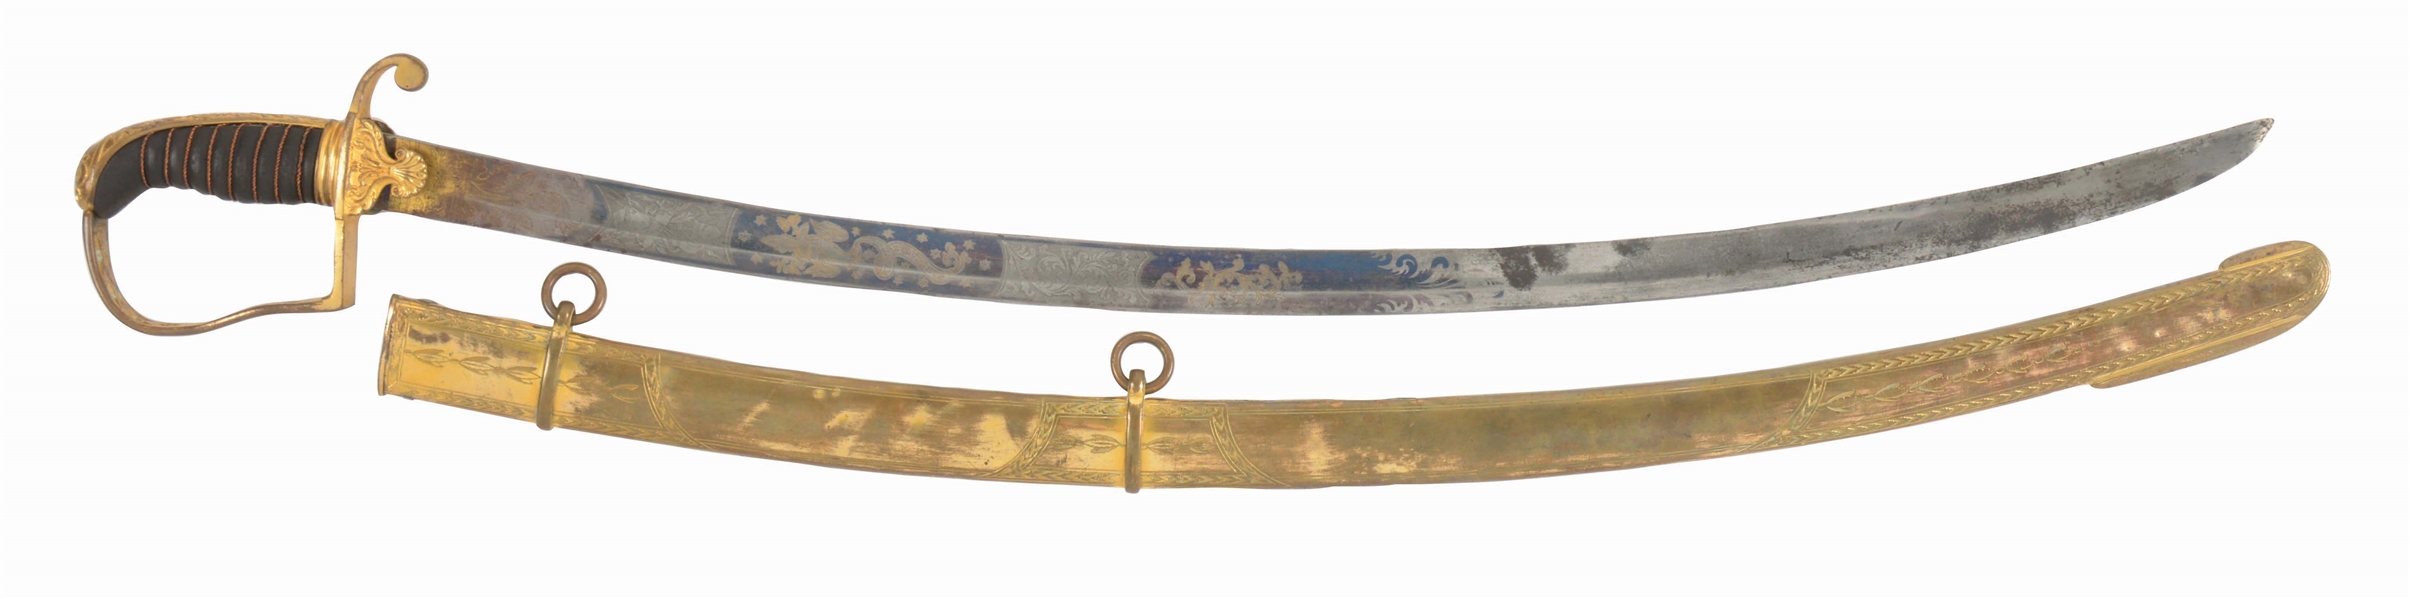 ELABORATE GILT BRASS MOUNTED ARTILLERY OFFICERS SABER WITH SCABBARD.